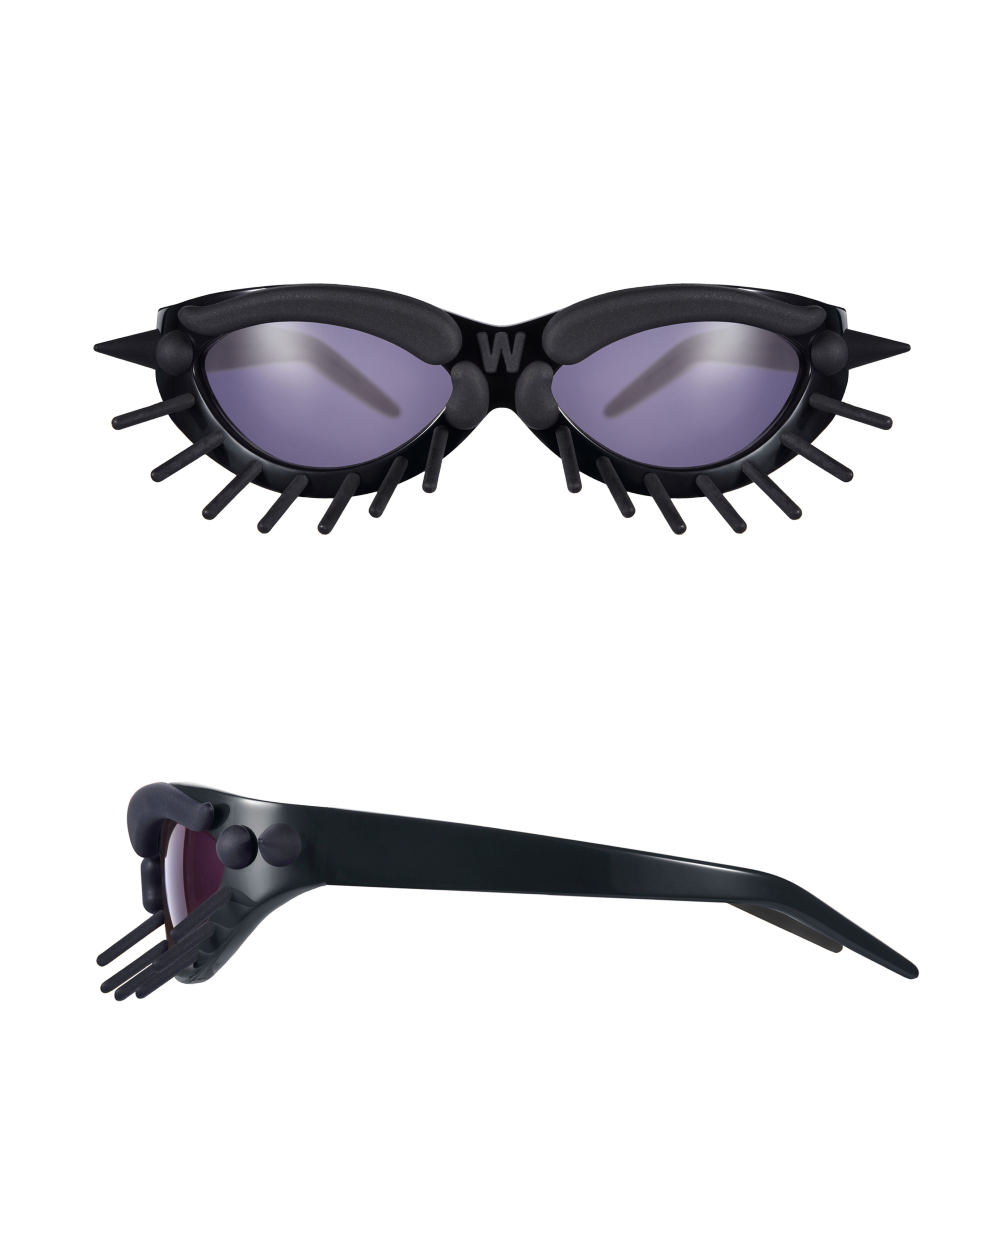 Toy Glasses Model 1. Black with black pins